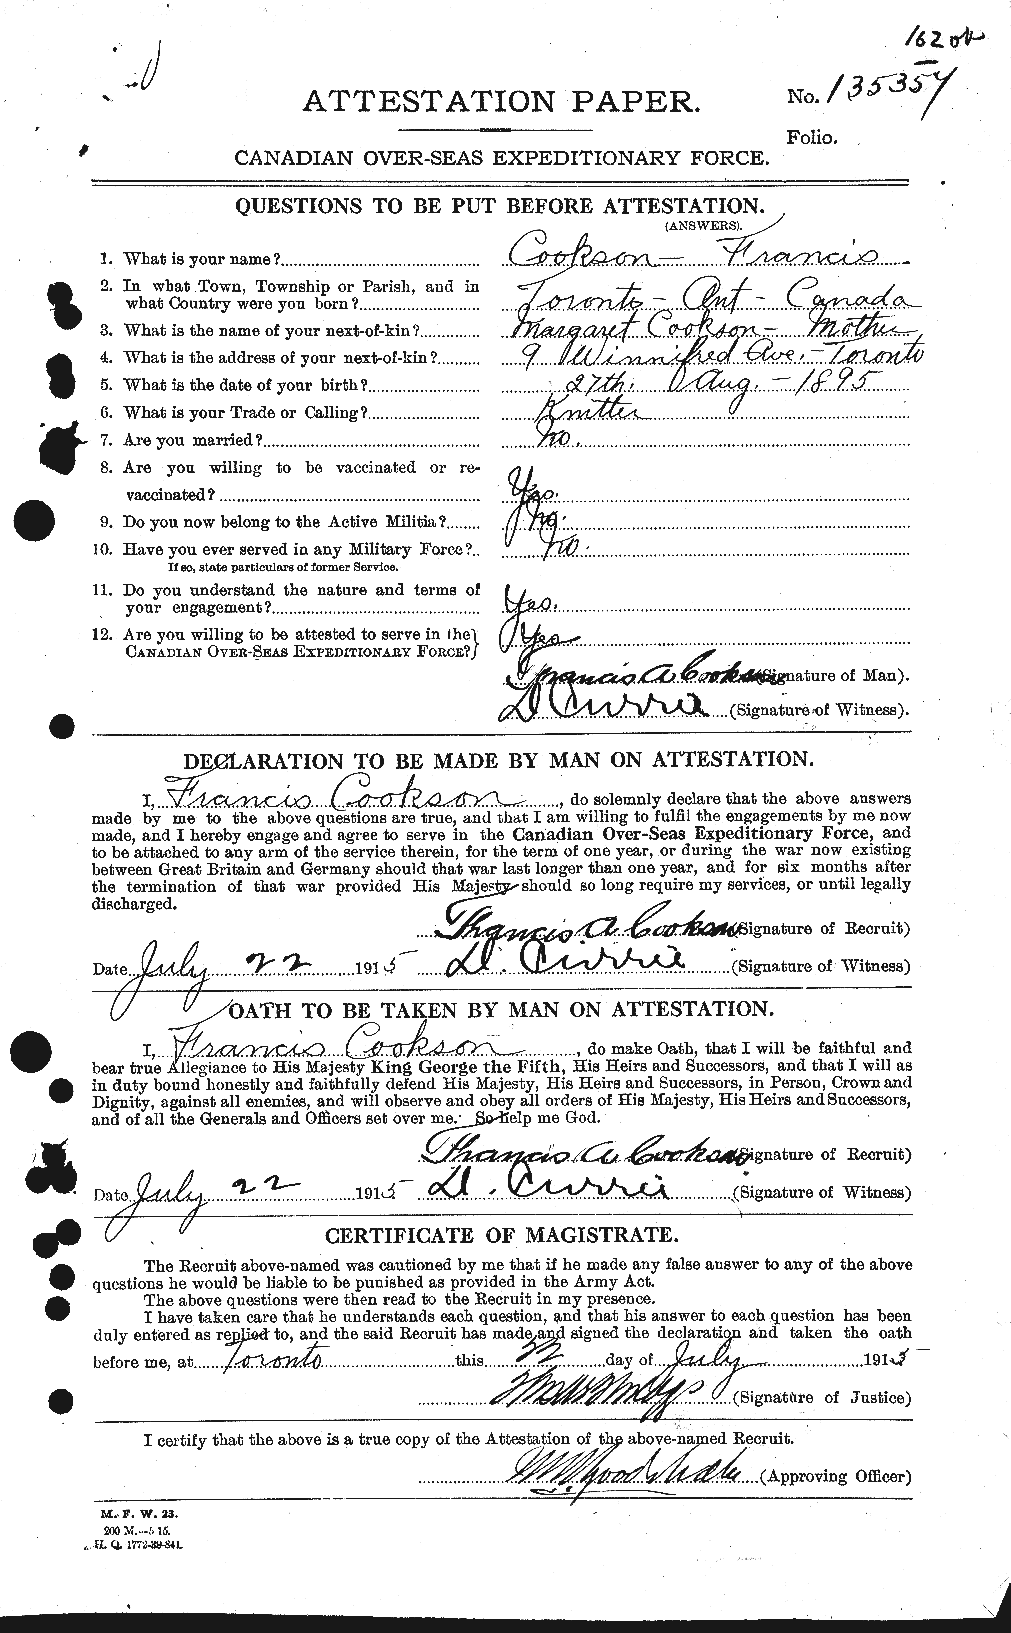 Personnel Records of the First World War - CEF 056760a